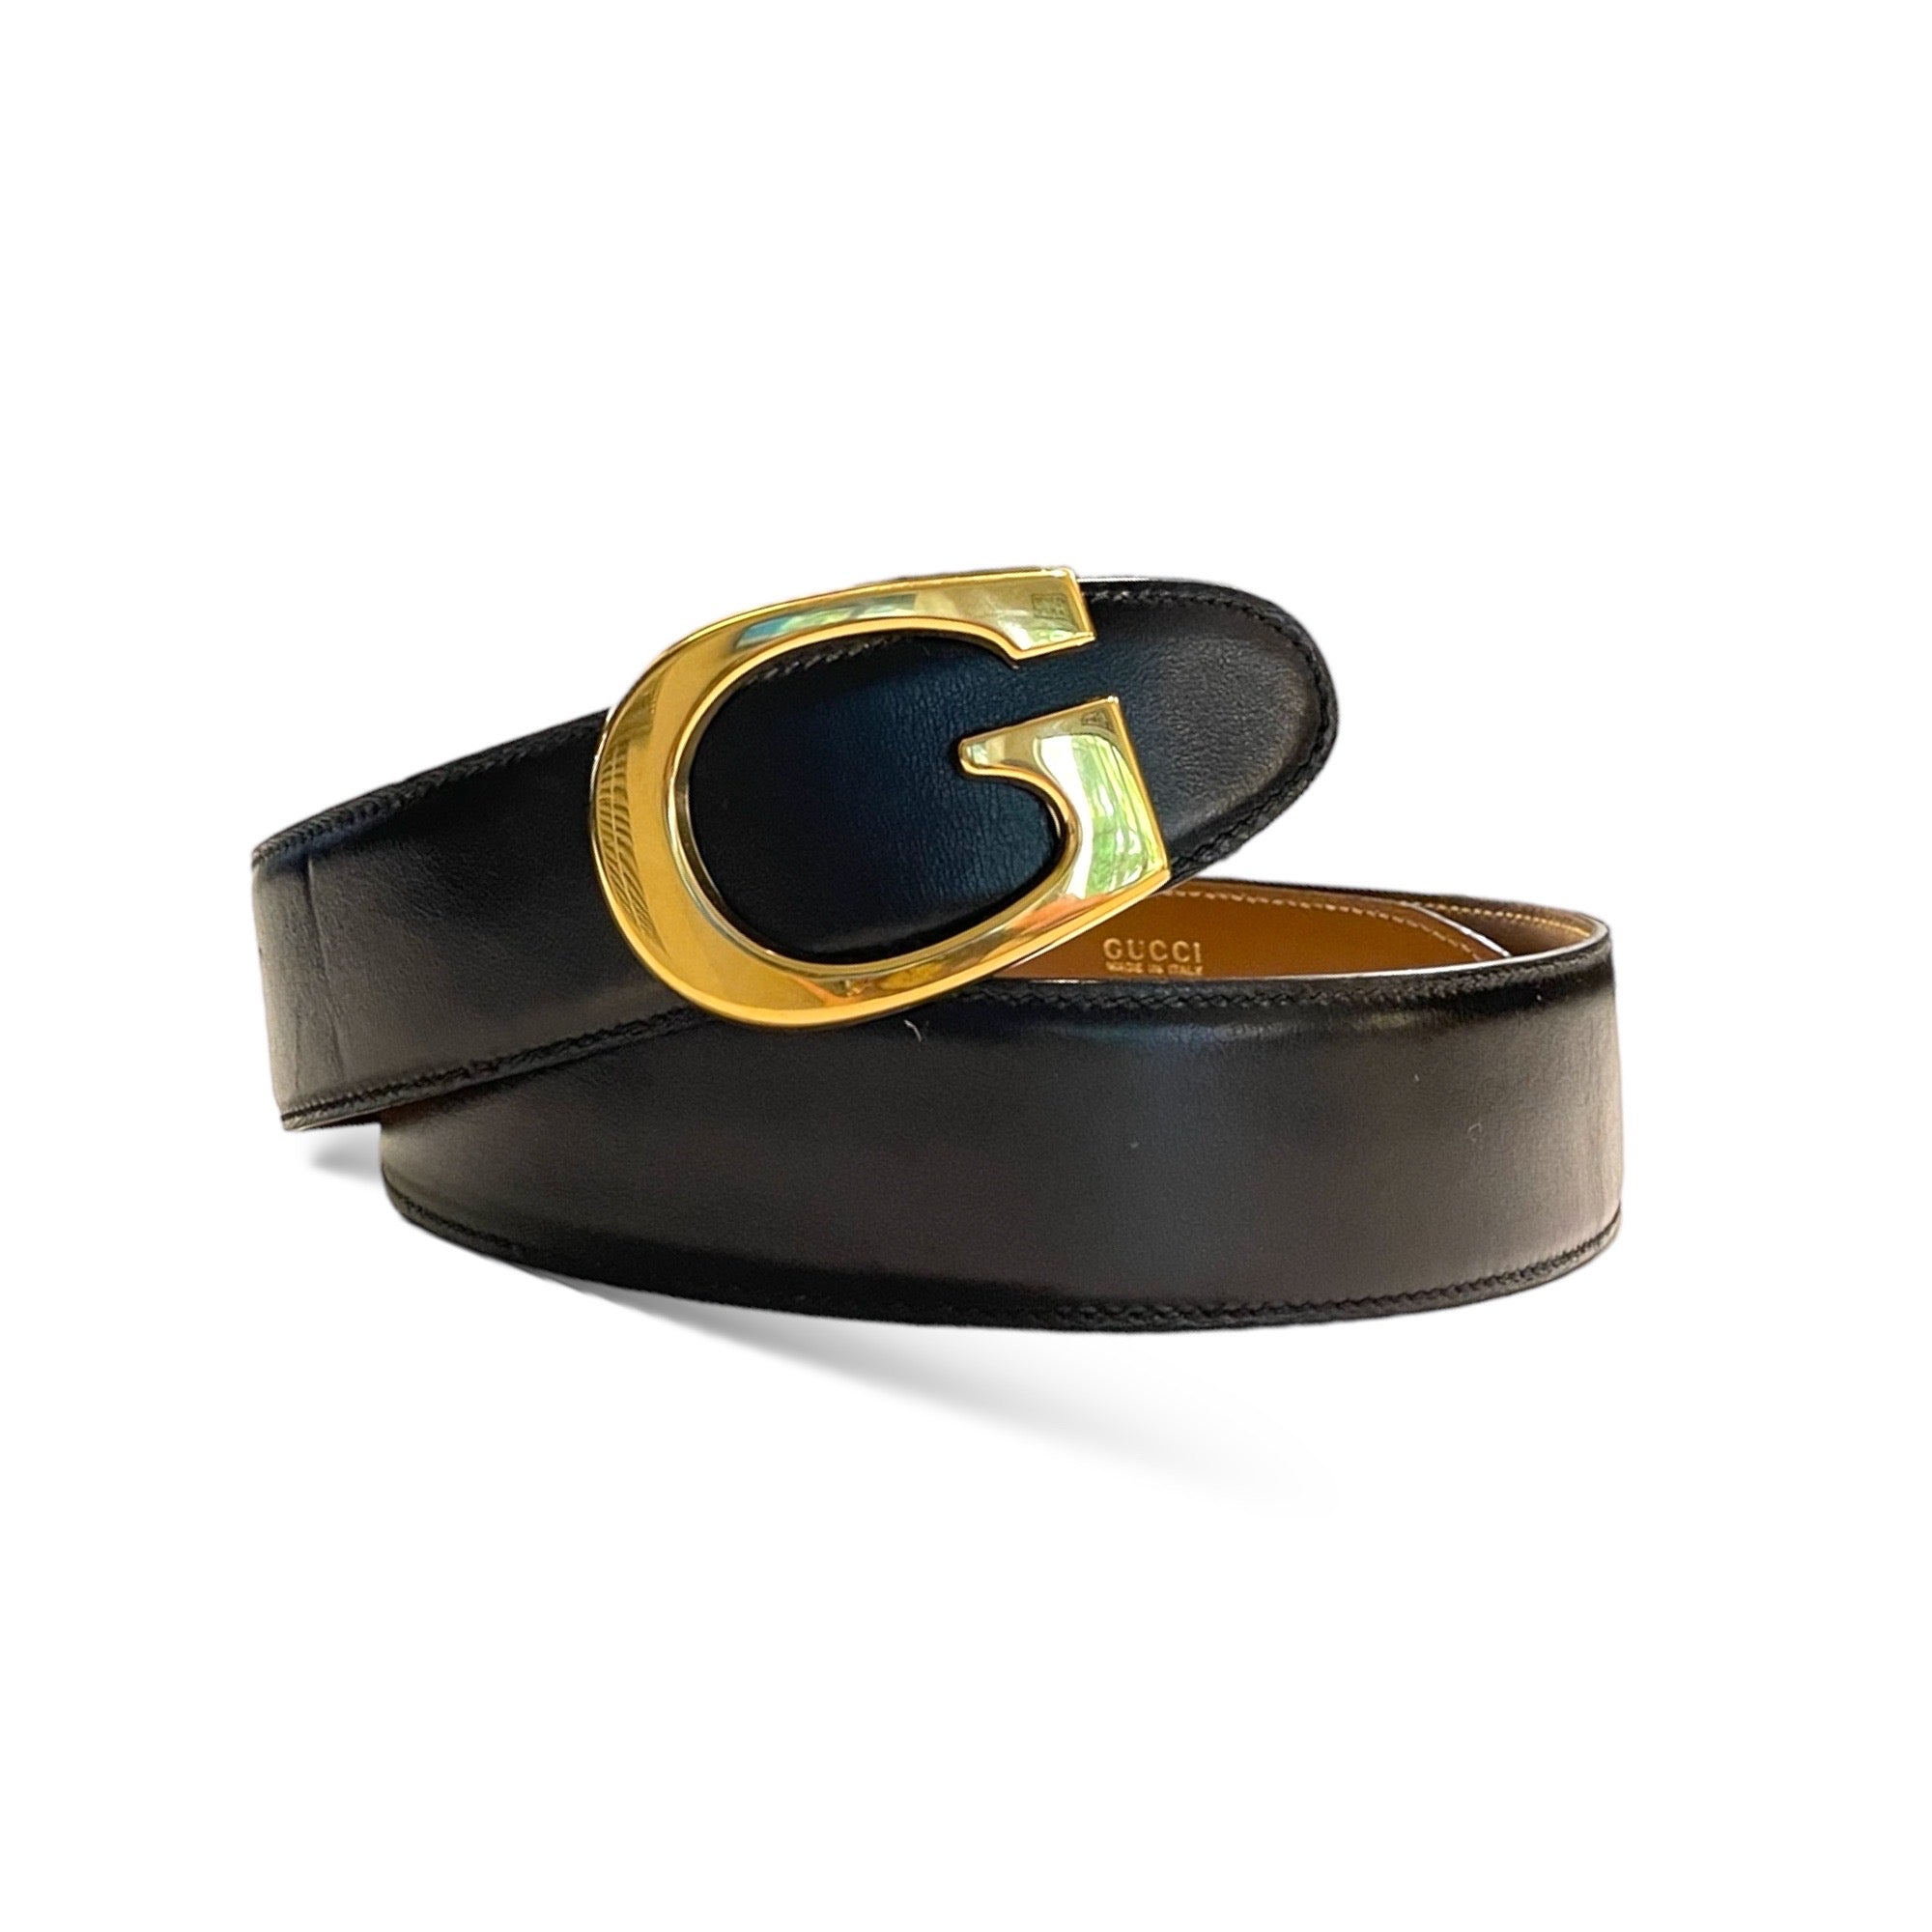 GUCCI Vintage Leather Belt with Removable Gold-Tone G Buckle |Size: 70/28|